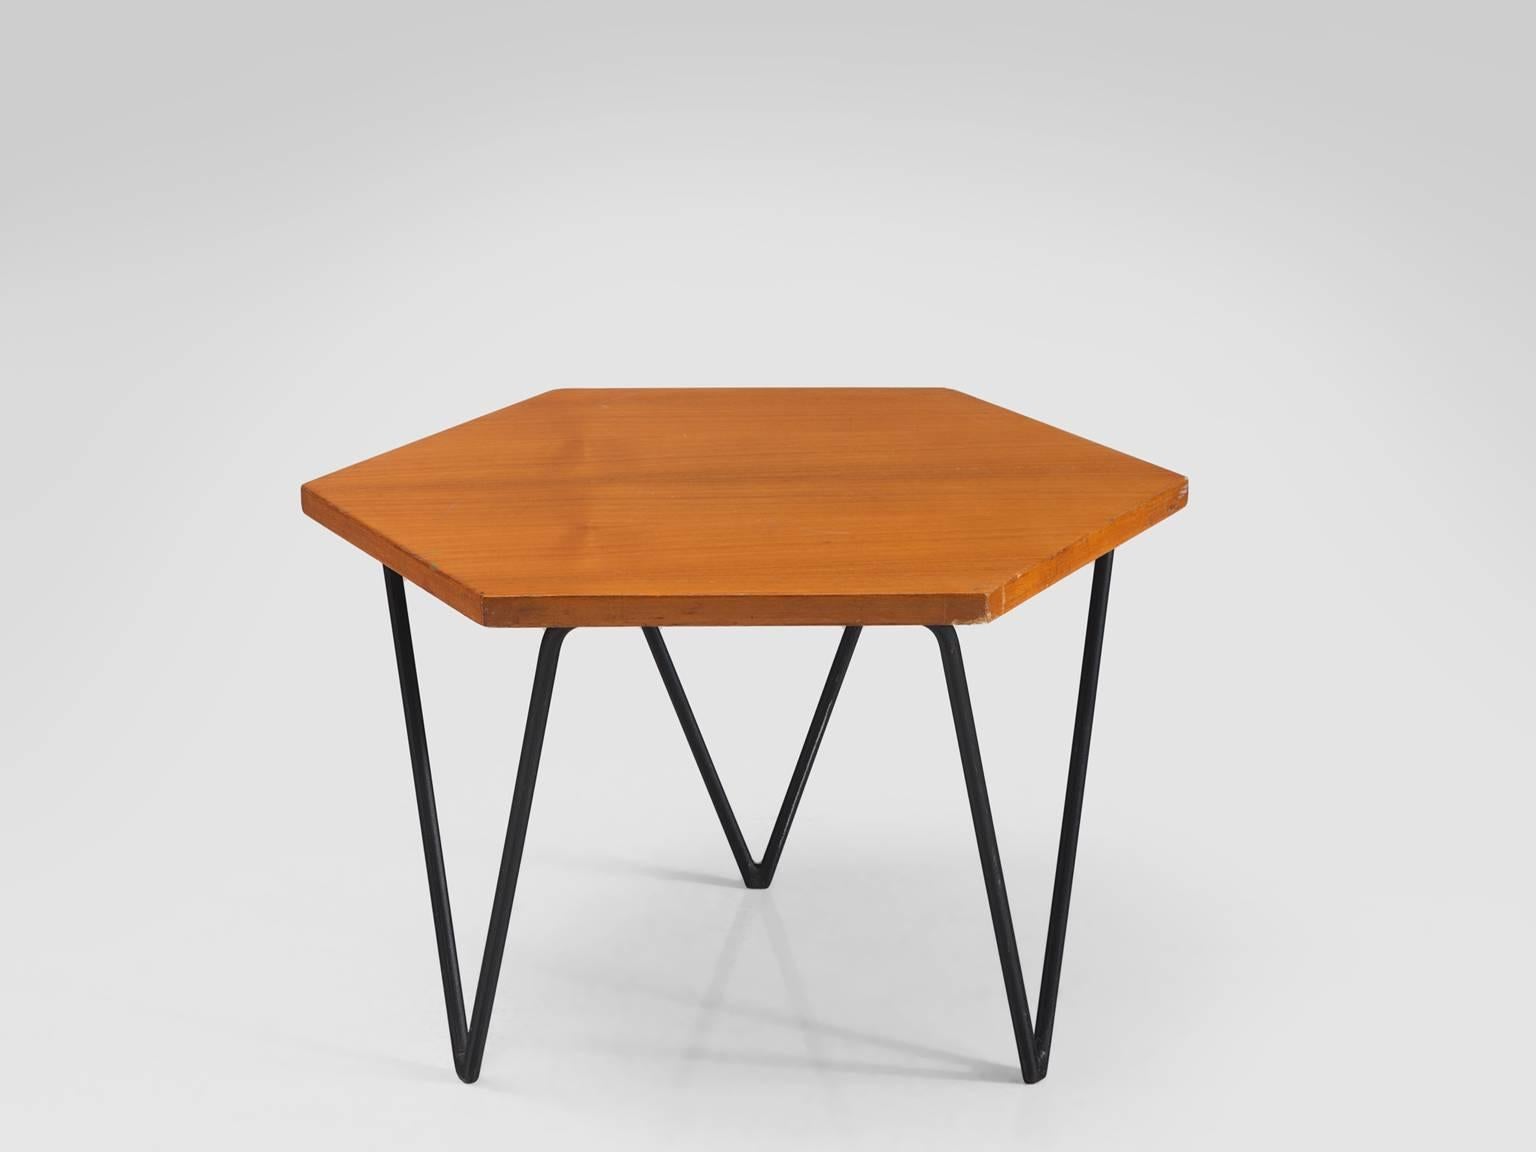 Gio Ponti for I.S.A., side table metal and wood, Italy, 1950s.

This side table designed by Gio Pont for ISA is part of the midcentury design collection. The table has a honeycomb shape and three triangular legs. The metal base is executed in black